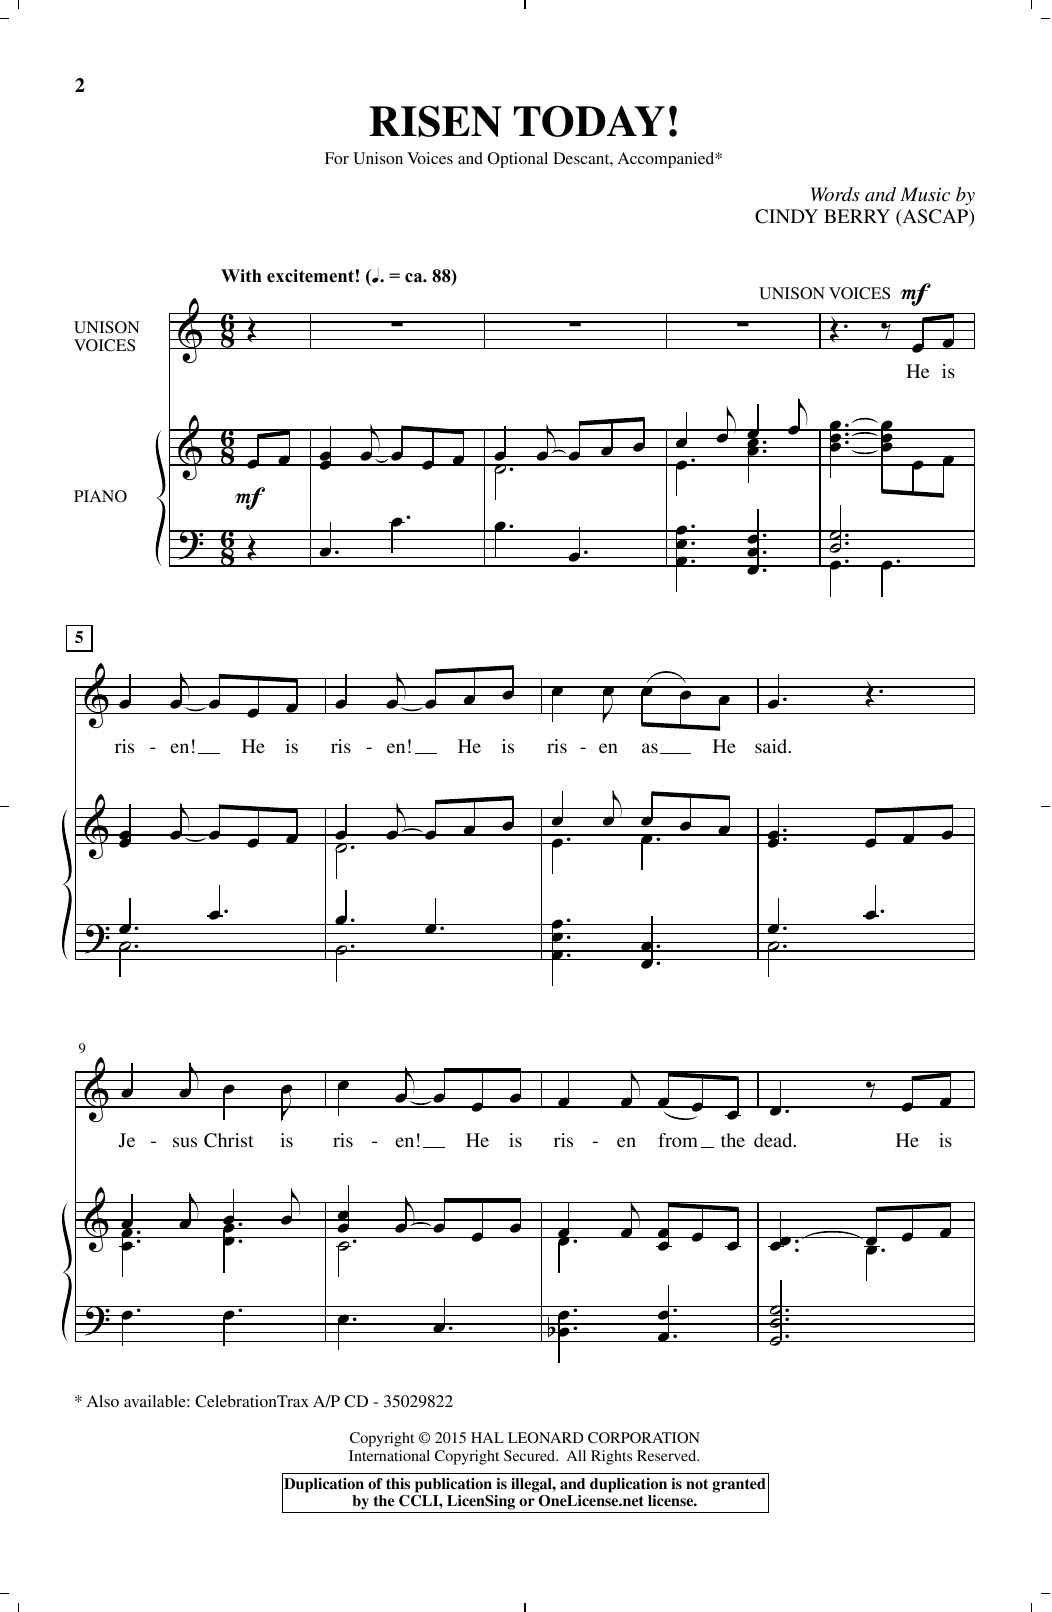 Download Cindy Berry Risen Today! Sheet Music